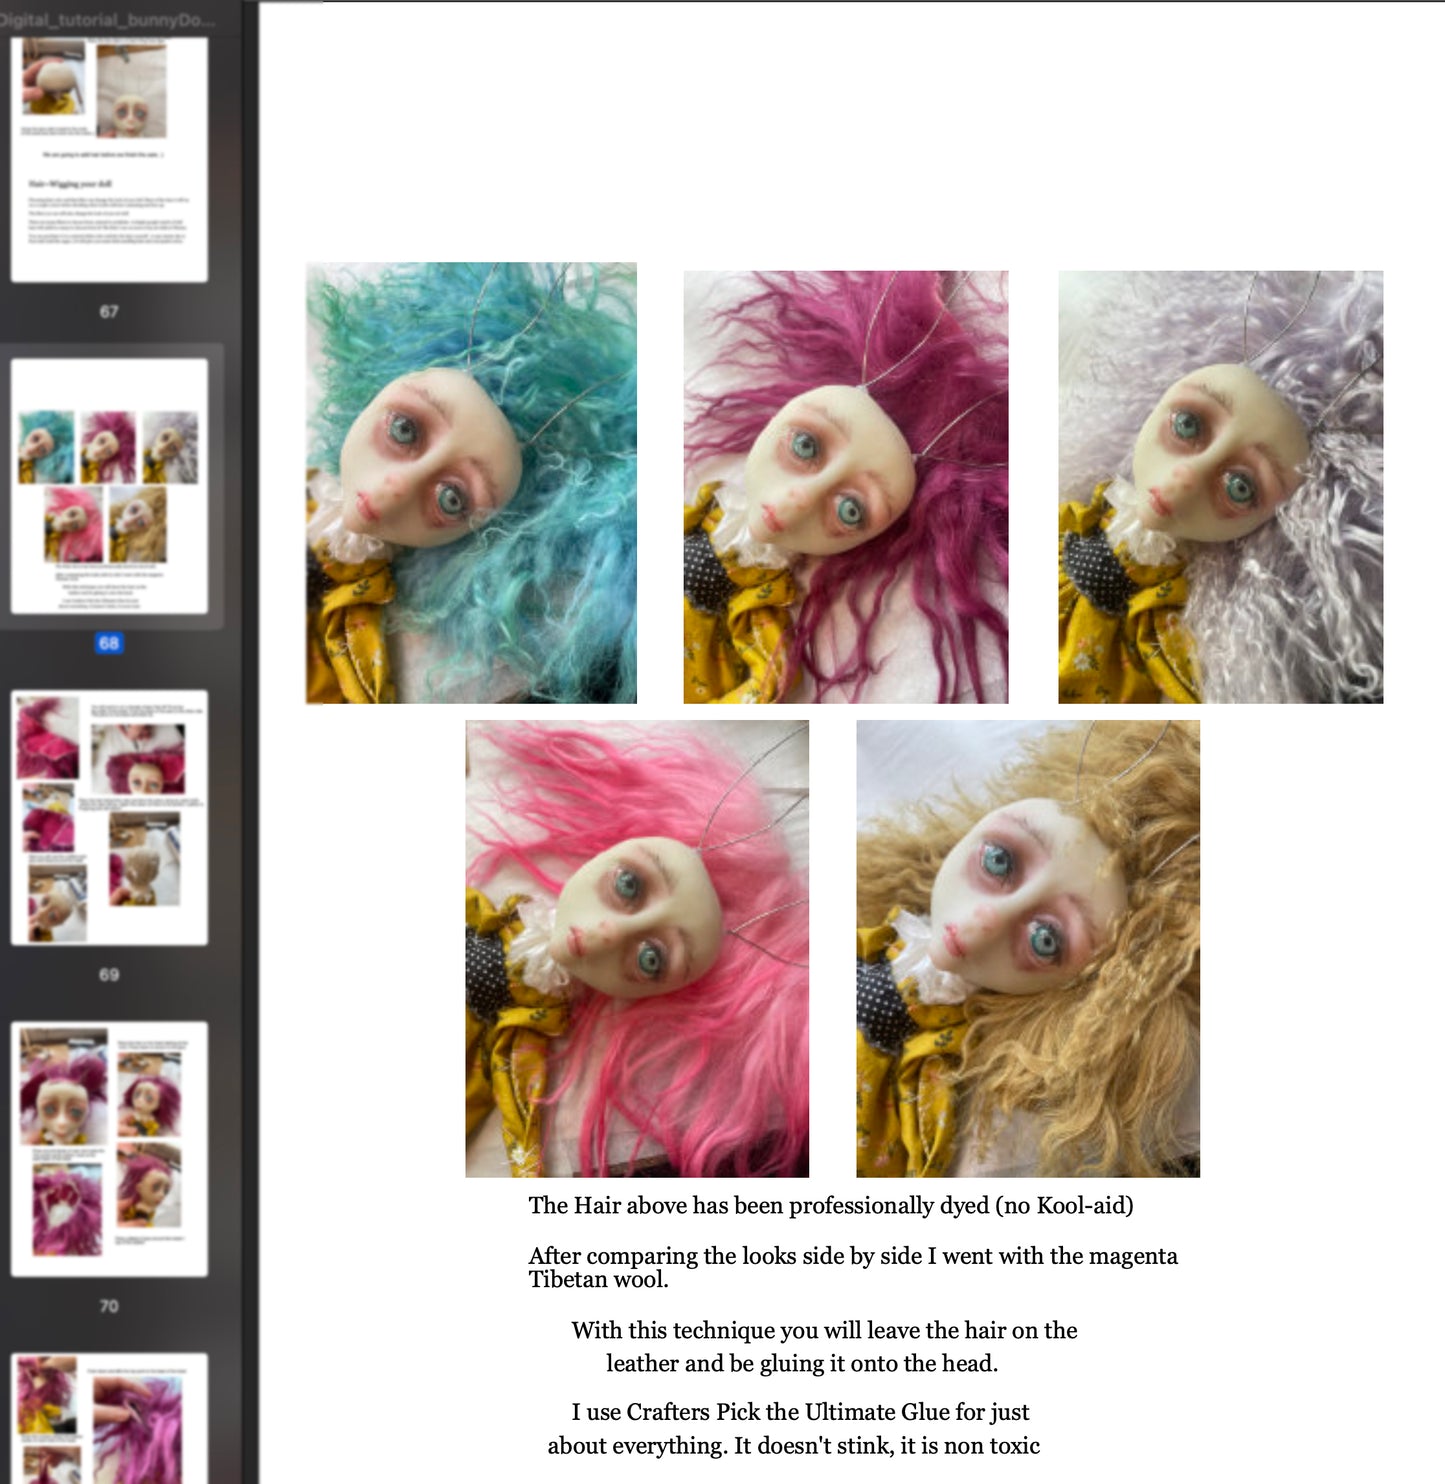 Class May 23rd-25th plus Tutorial how to Create a shabby linked Art Doll LuLu Style